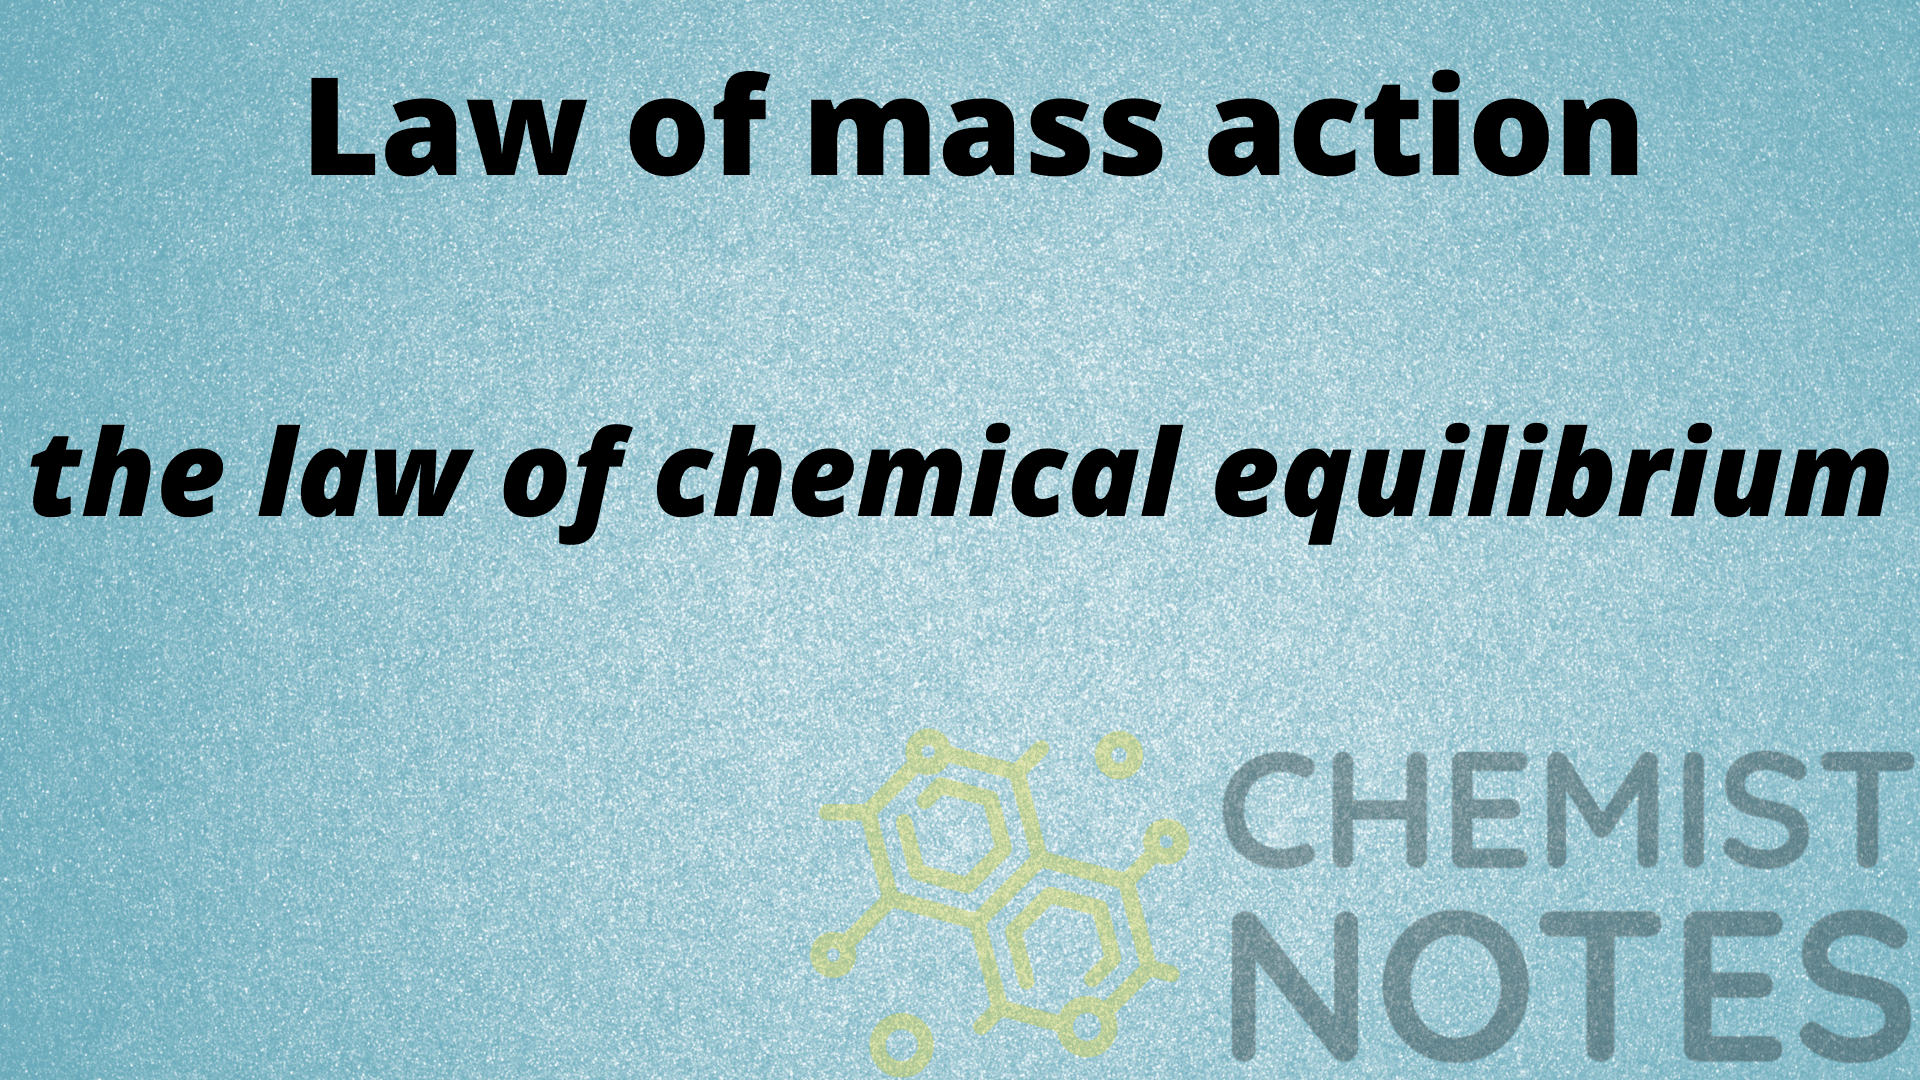 Law of mass action: the law of chemical equilibrium - Chemistry Notes